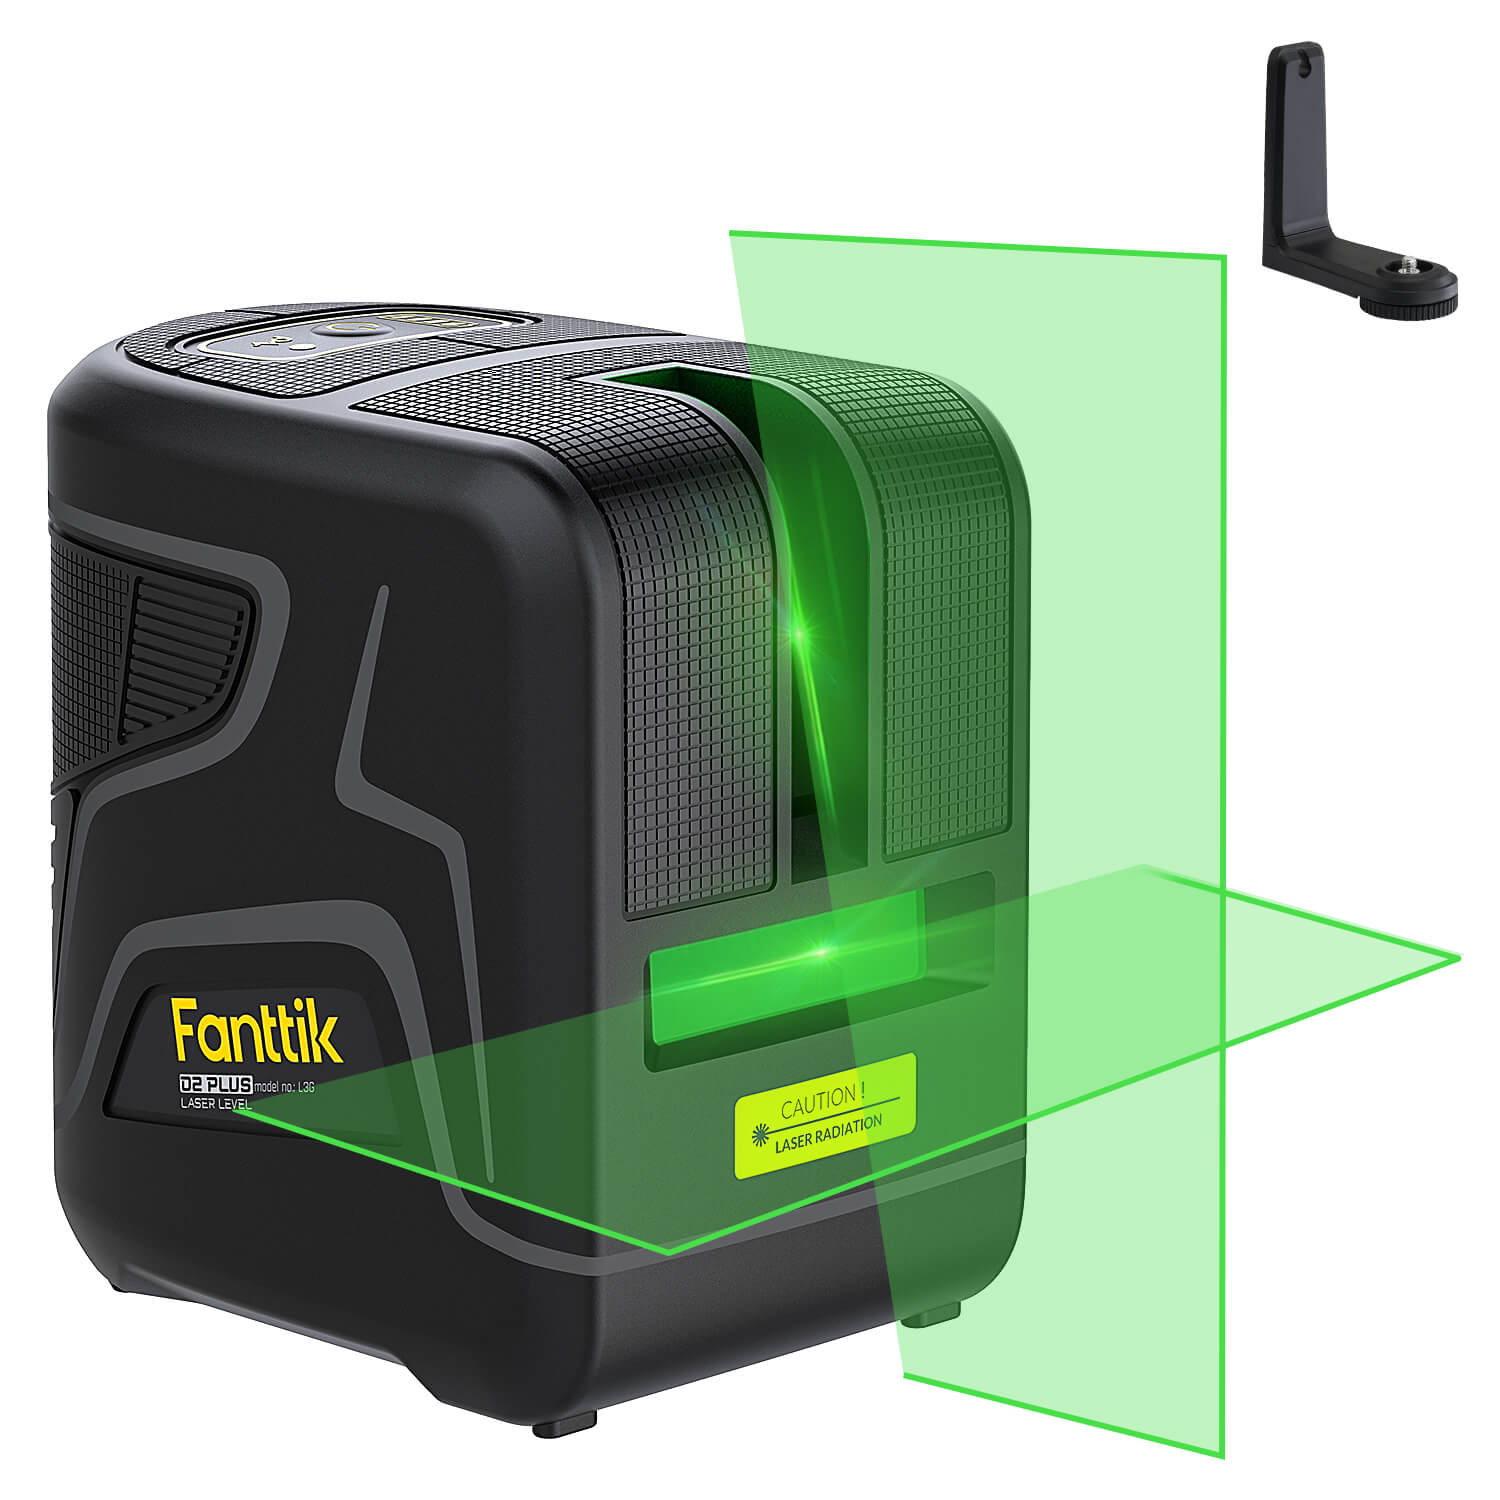 Fanttik D2 PLUS Cross Line Laser, Vertical Green Beam Spread Covers of 130°, DIY Self-leveling Mode, 2600mAh Built-in Rechargeable Battery, 100Ft Visibility, Pulse Mode, Class II (<1 mW max output)